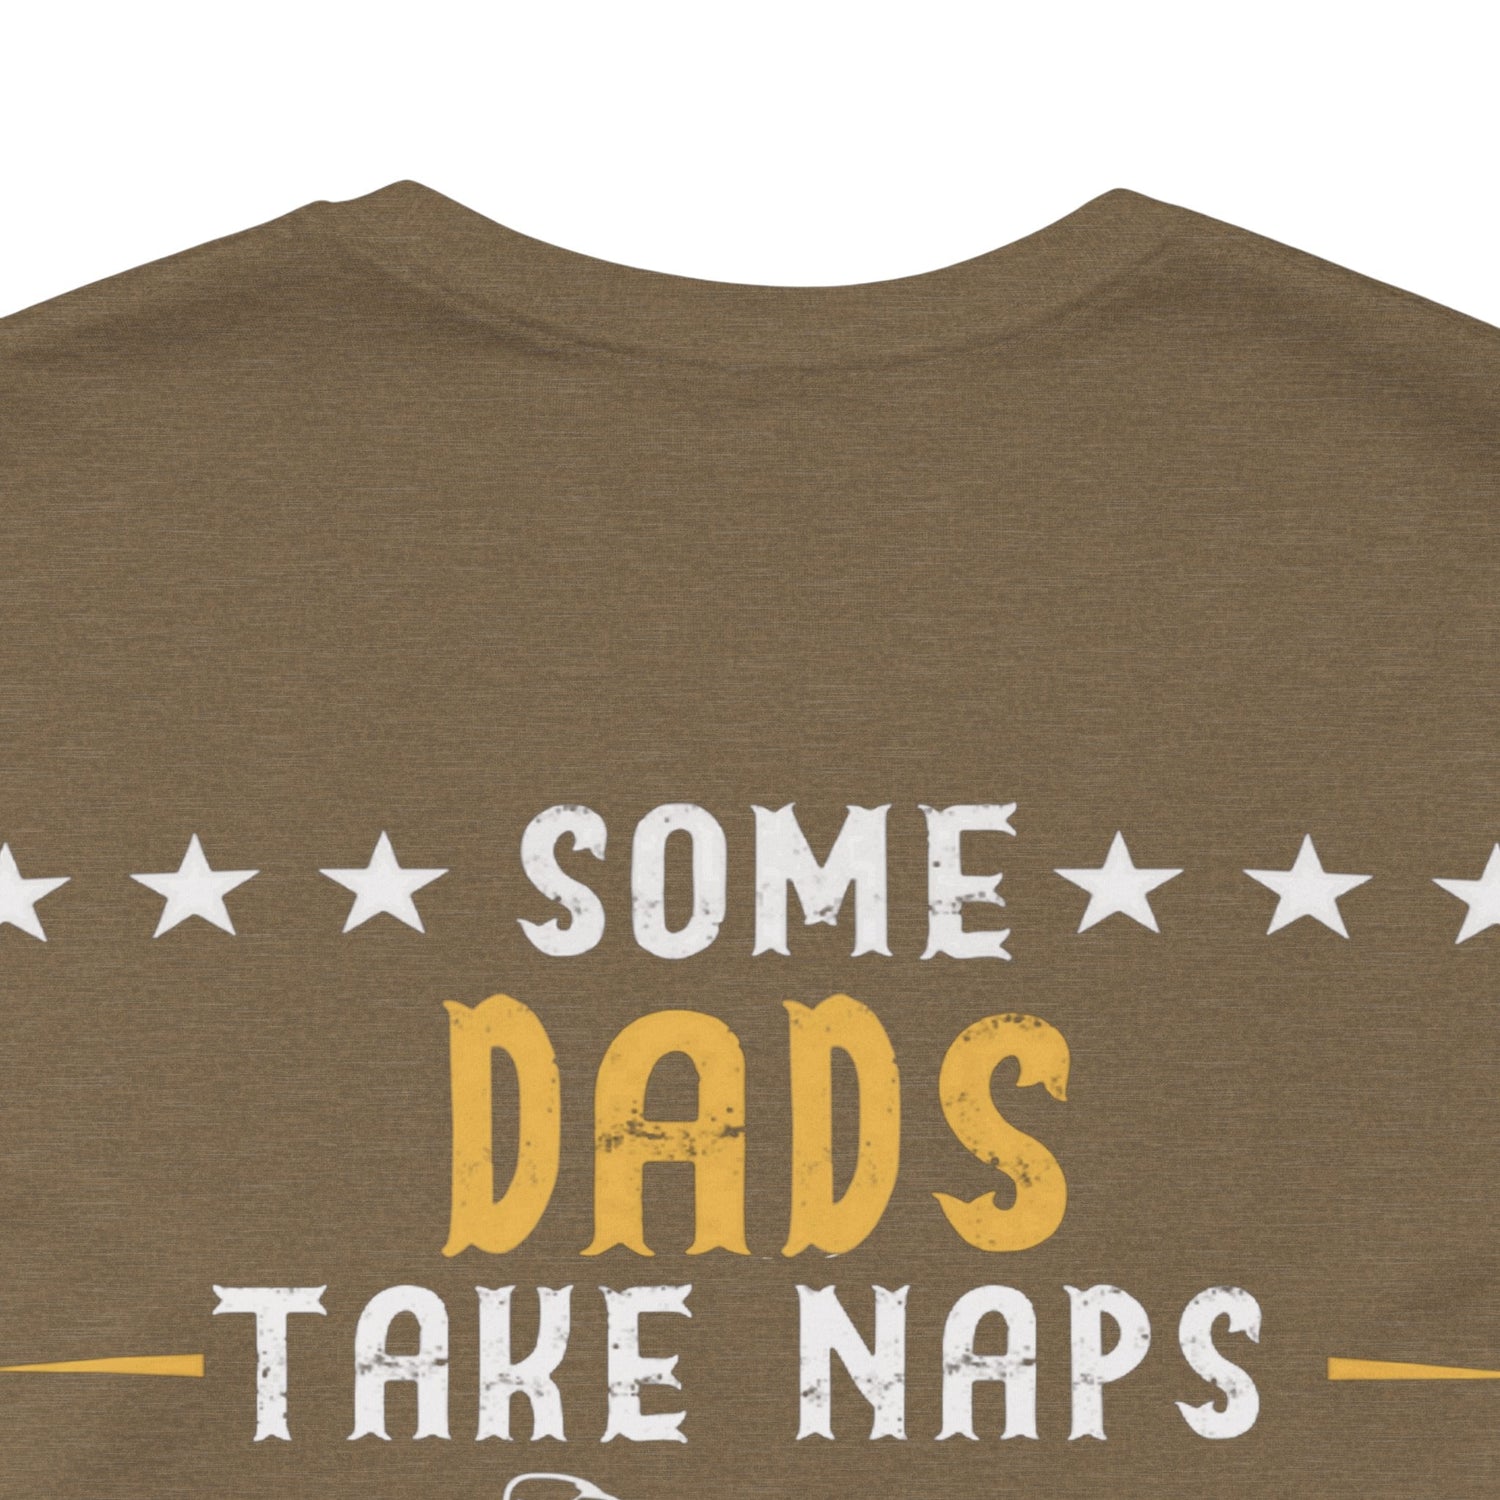 Kate McEnroe New York Biker Dad Shirt For Fathers day, Birthday Gift, Real Dads Ride Motorcycles Then Take Naps Shirt, Funny Biker Shirt, Dad GiftT - Shirt21746328626535924808